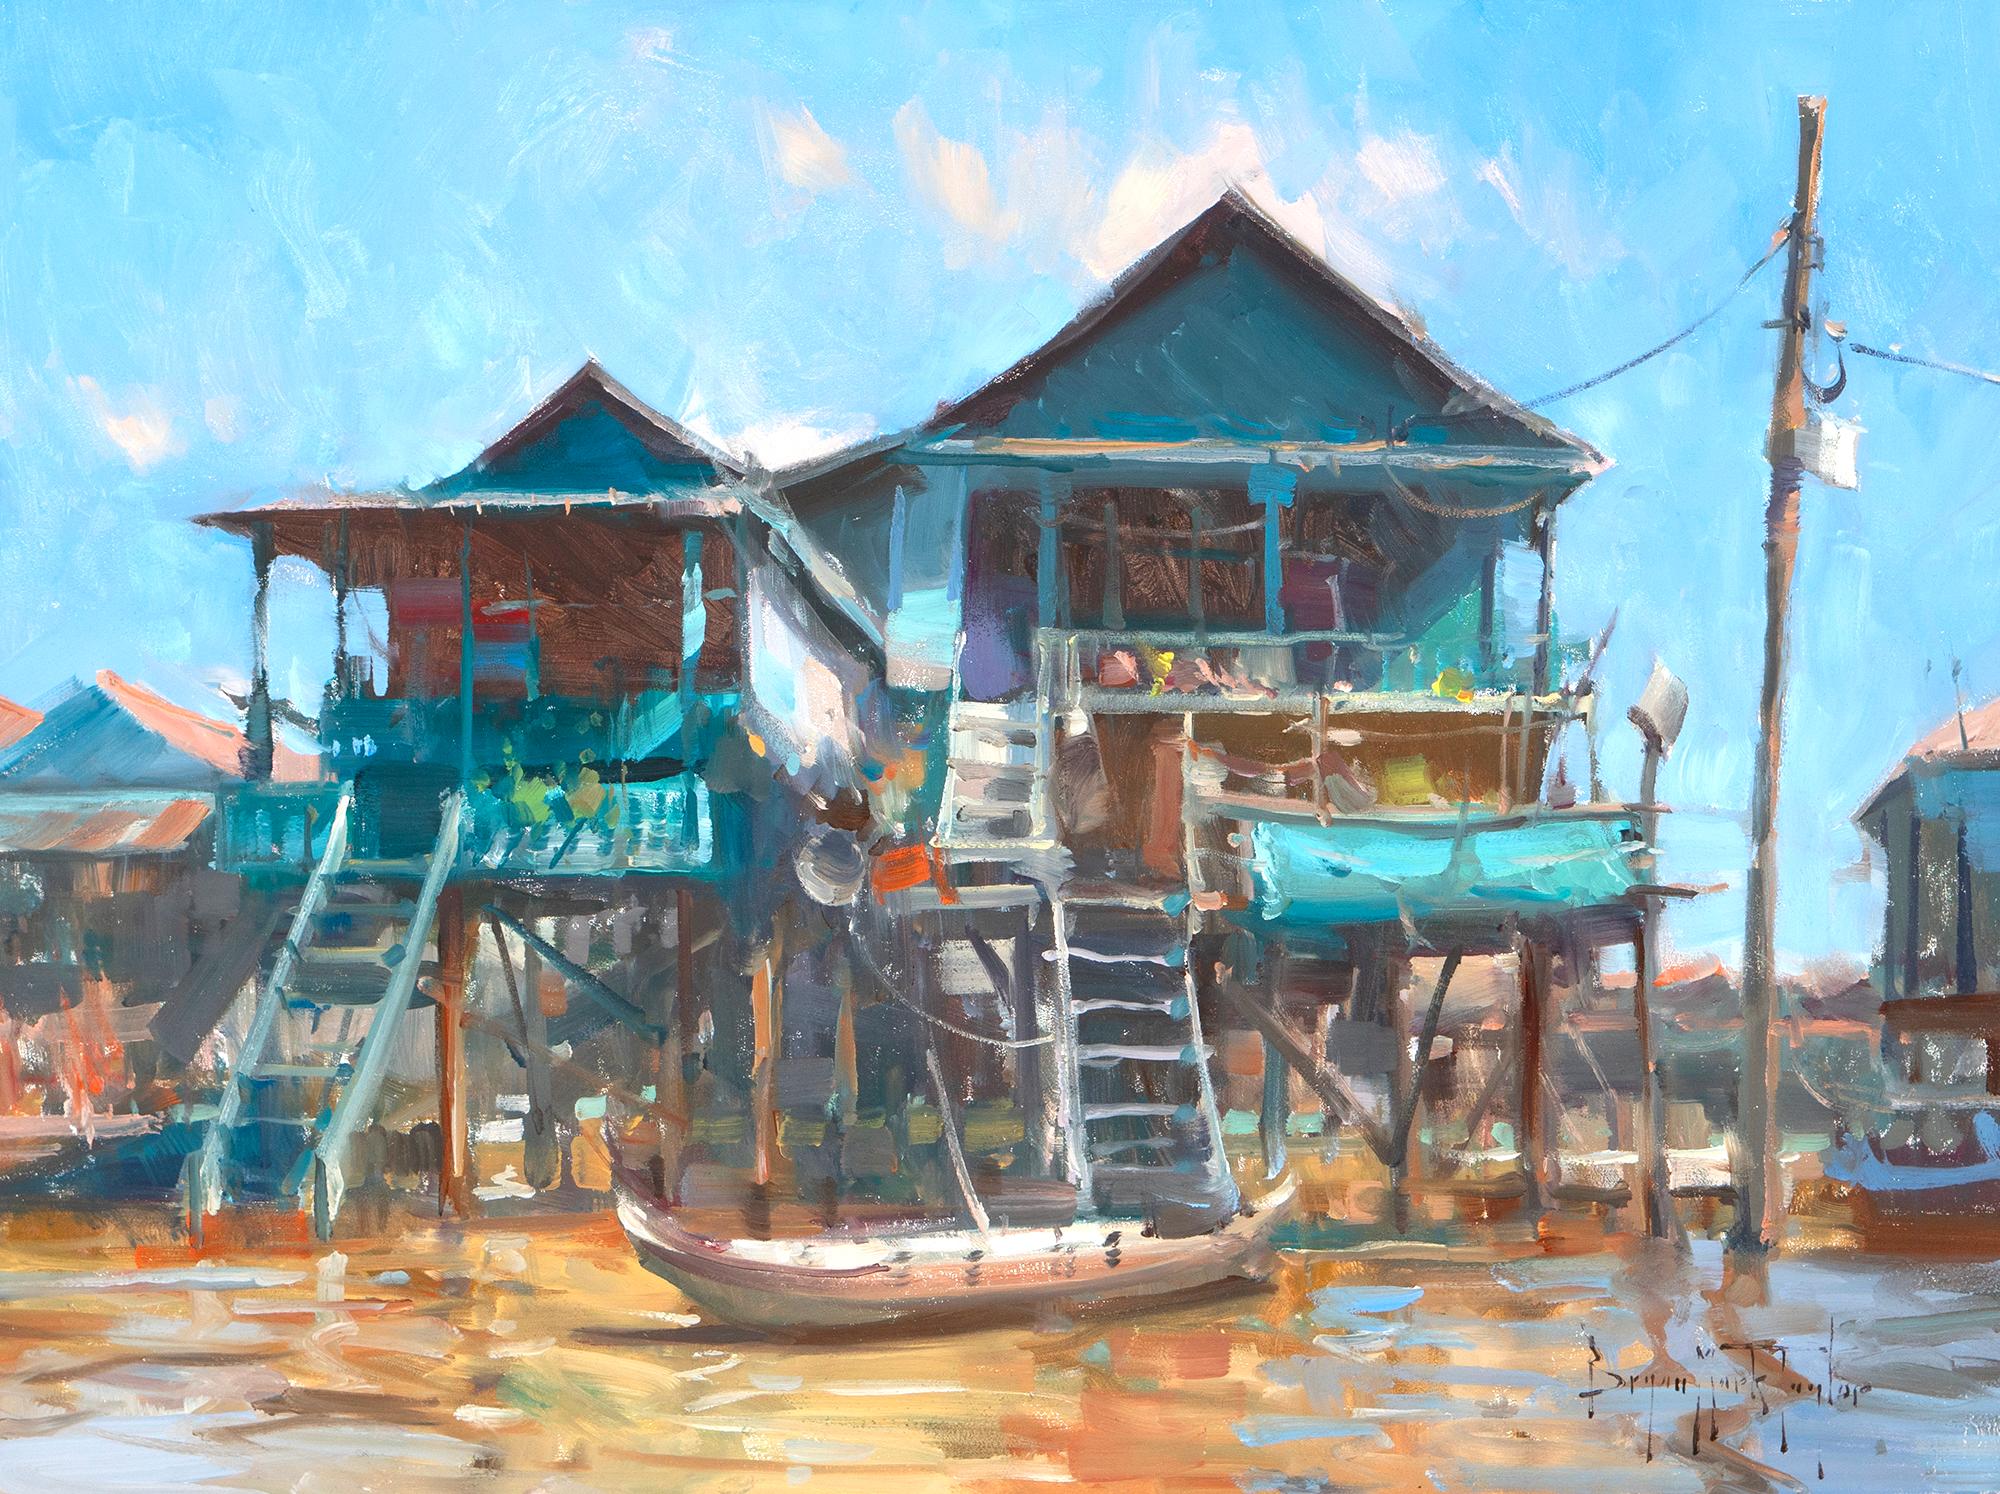 Bryan Mark Taylor Landscape Painting - "Floating City" Modern Impressionist Scene in Cambodia